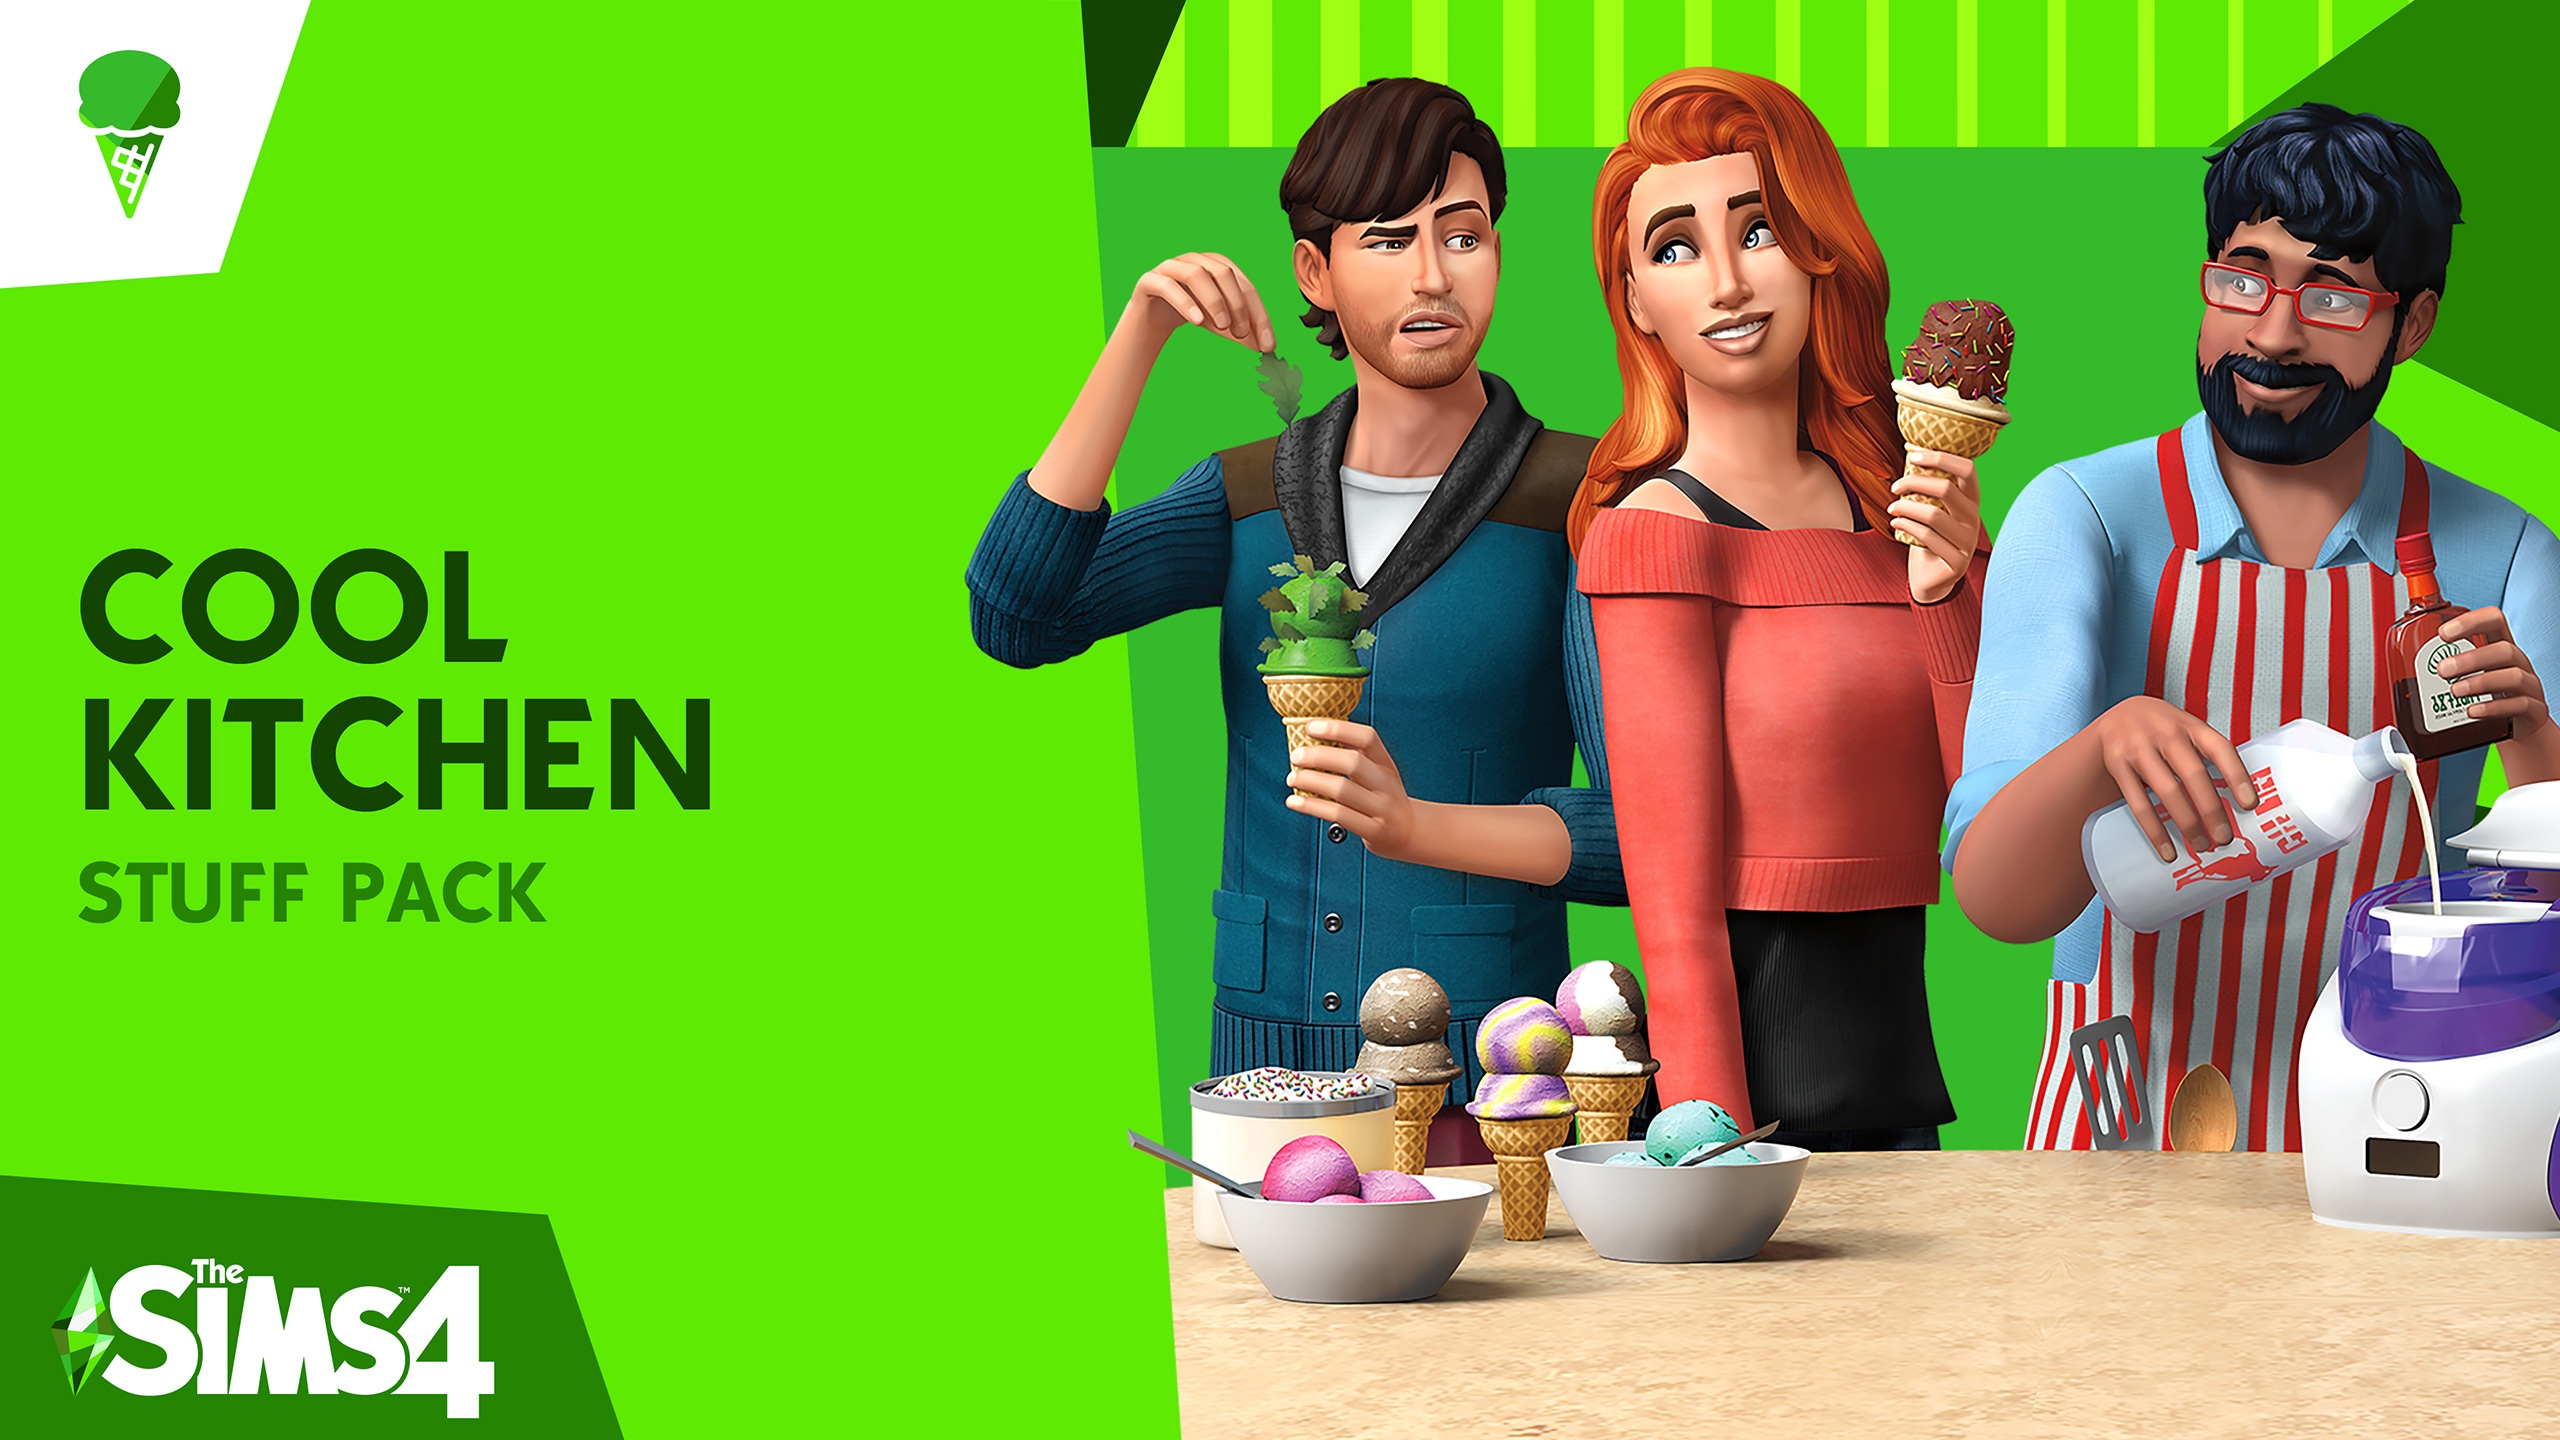 https://gaming-cdn.com/images/products/2489/orig/the-sims-4-cool-kitchen-stuff-pc-mac-game-ea-app-cover.jpg?v=1686147817